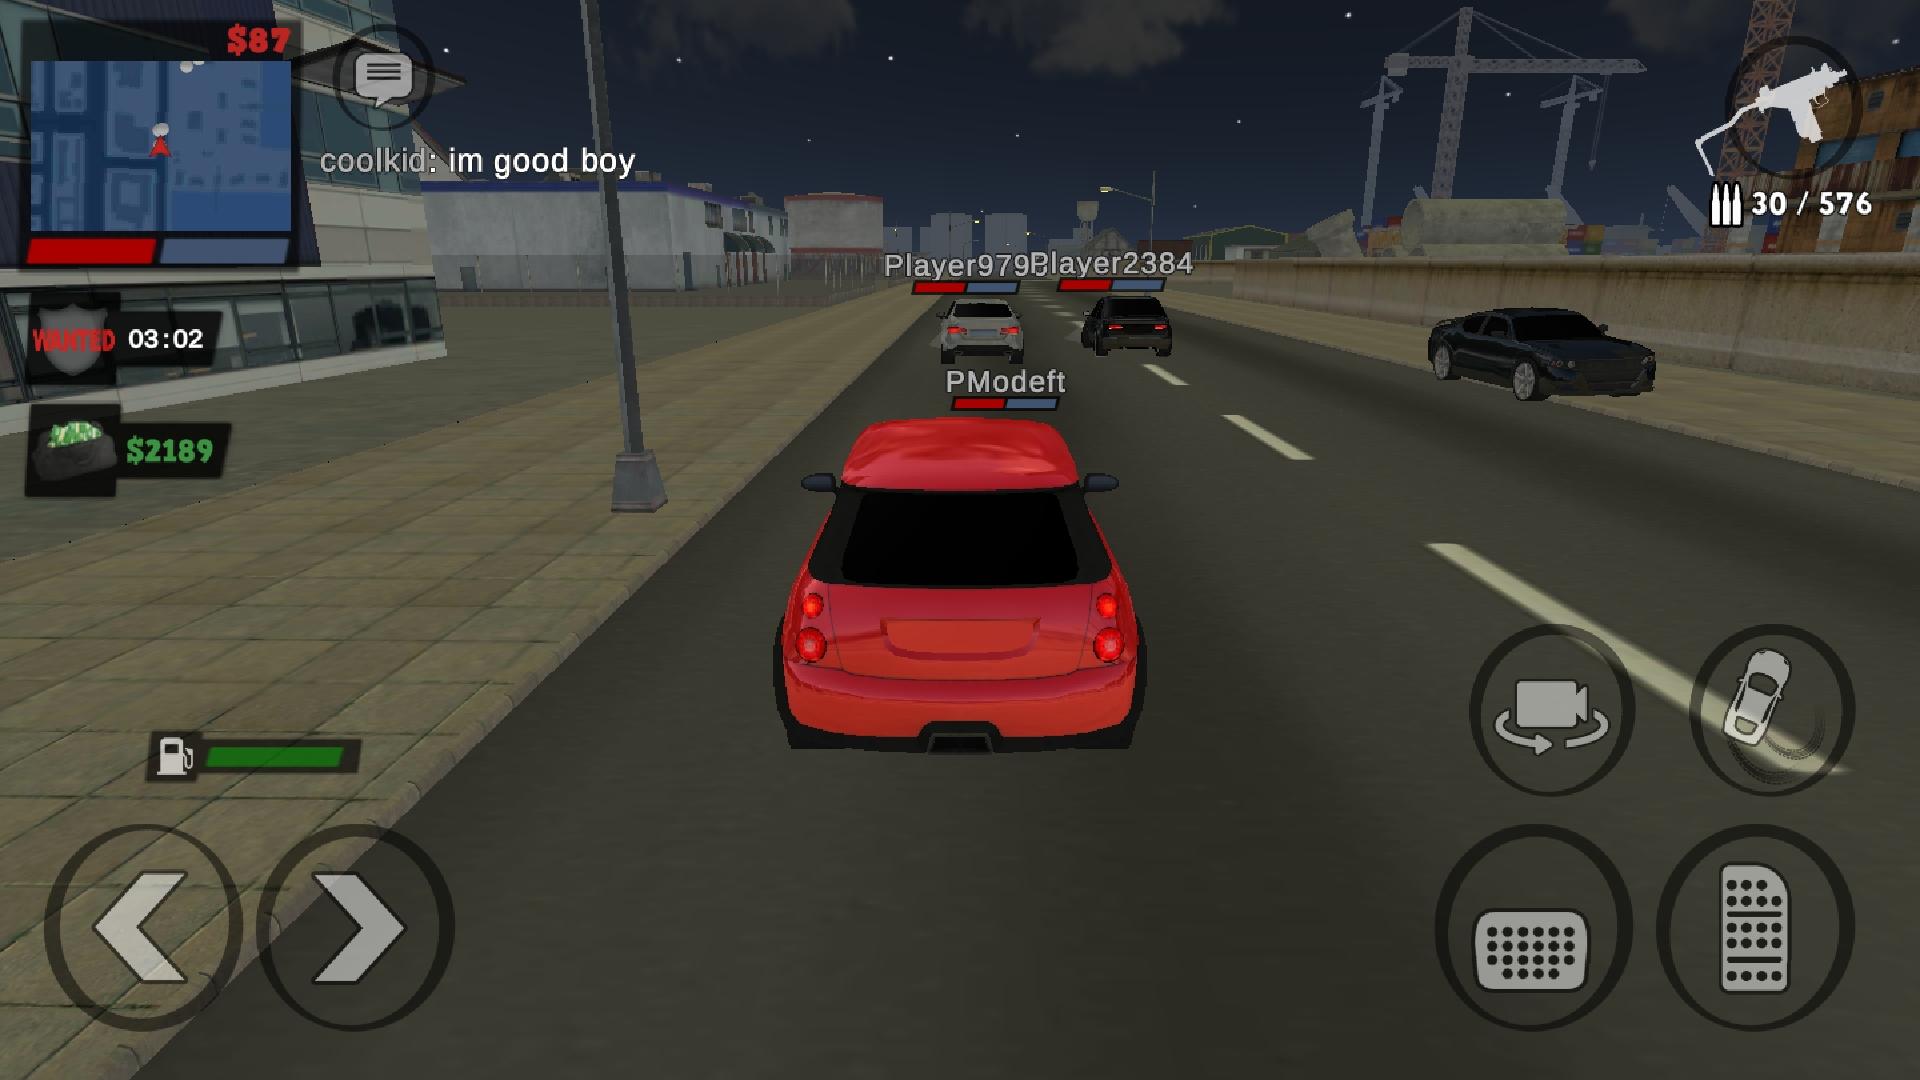 Gameplay of the Justice Rivals 3 Cops&Robbers for Android phone or tablet.